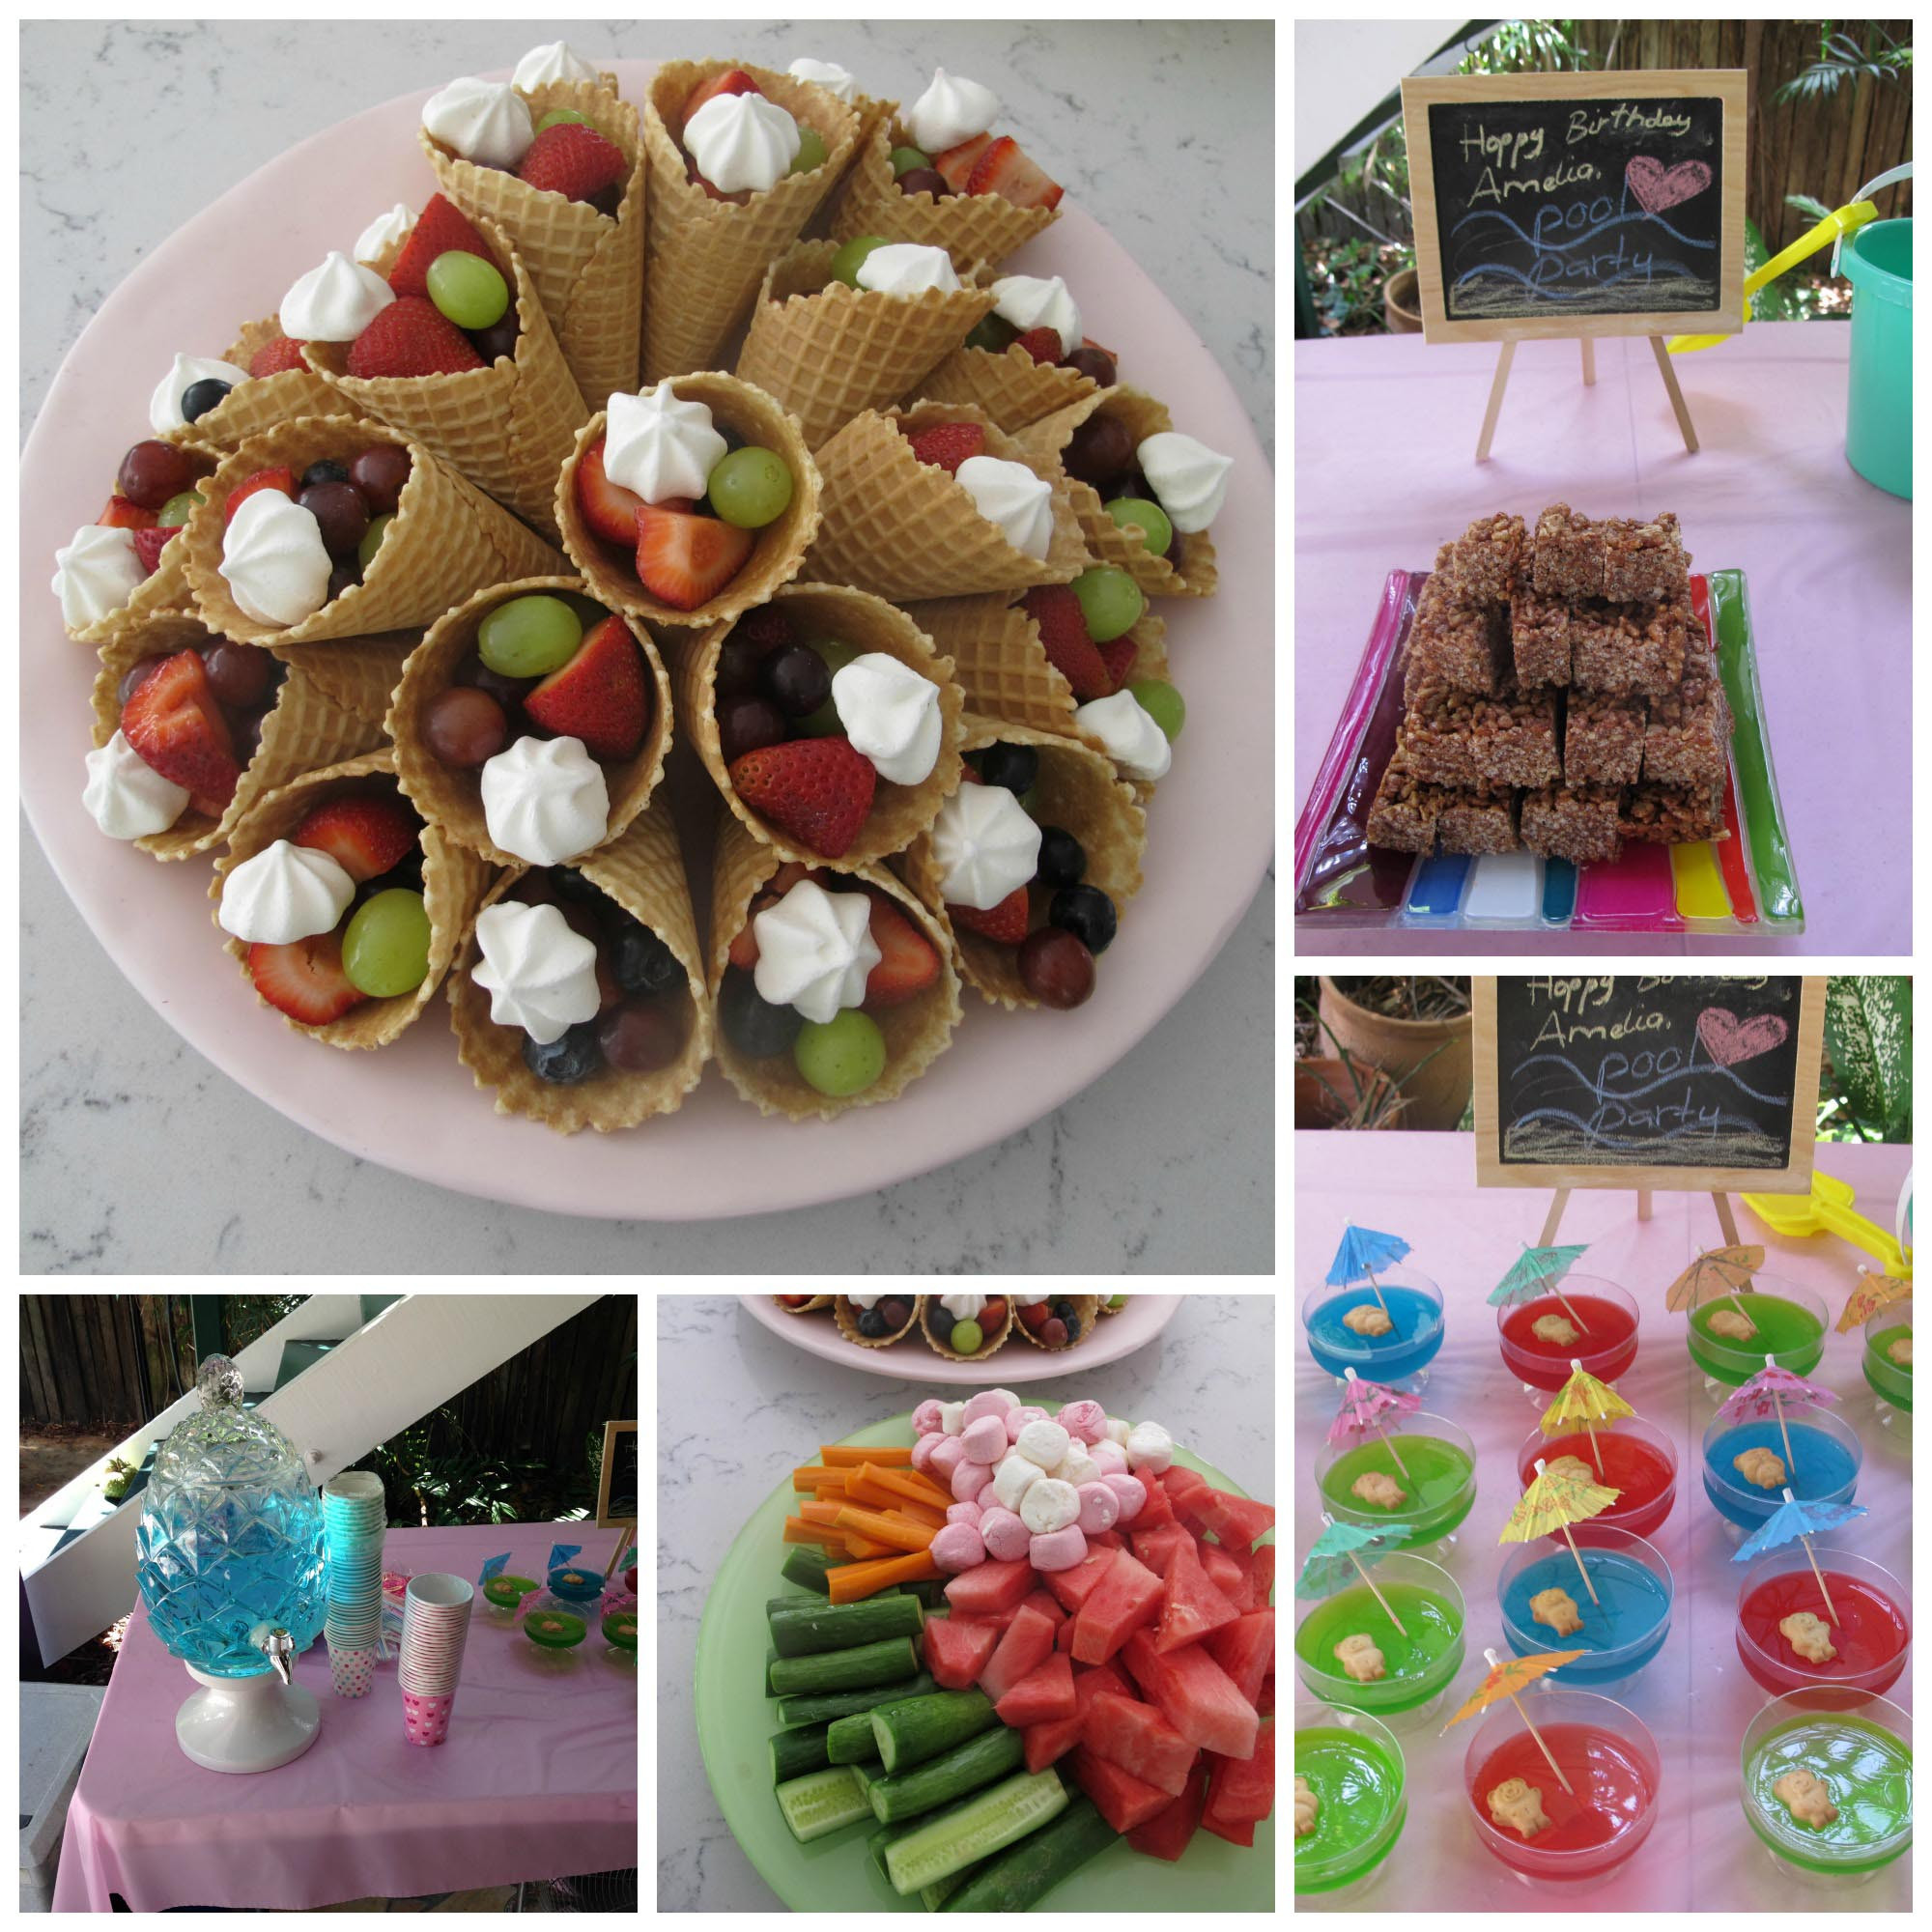 Pool Party Food Ideas For Adults
 The Perfect Kids Pool Party